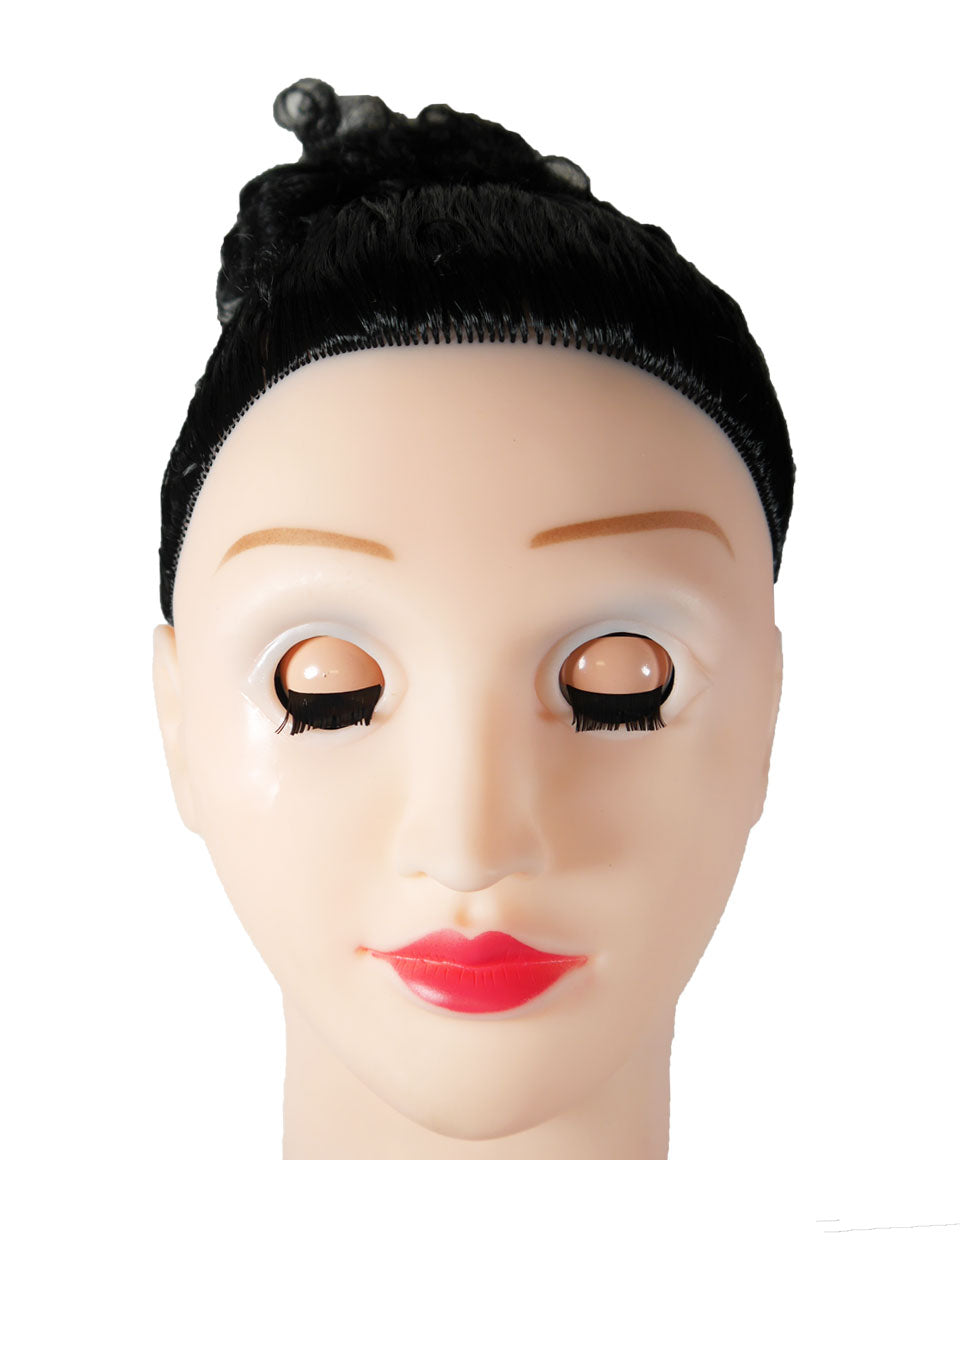 Bossoftoys Sindy Blowup doll with real face - 26-00020